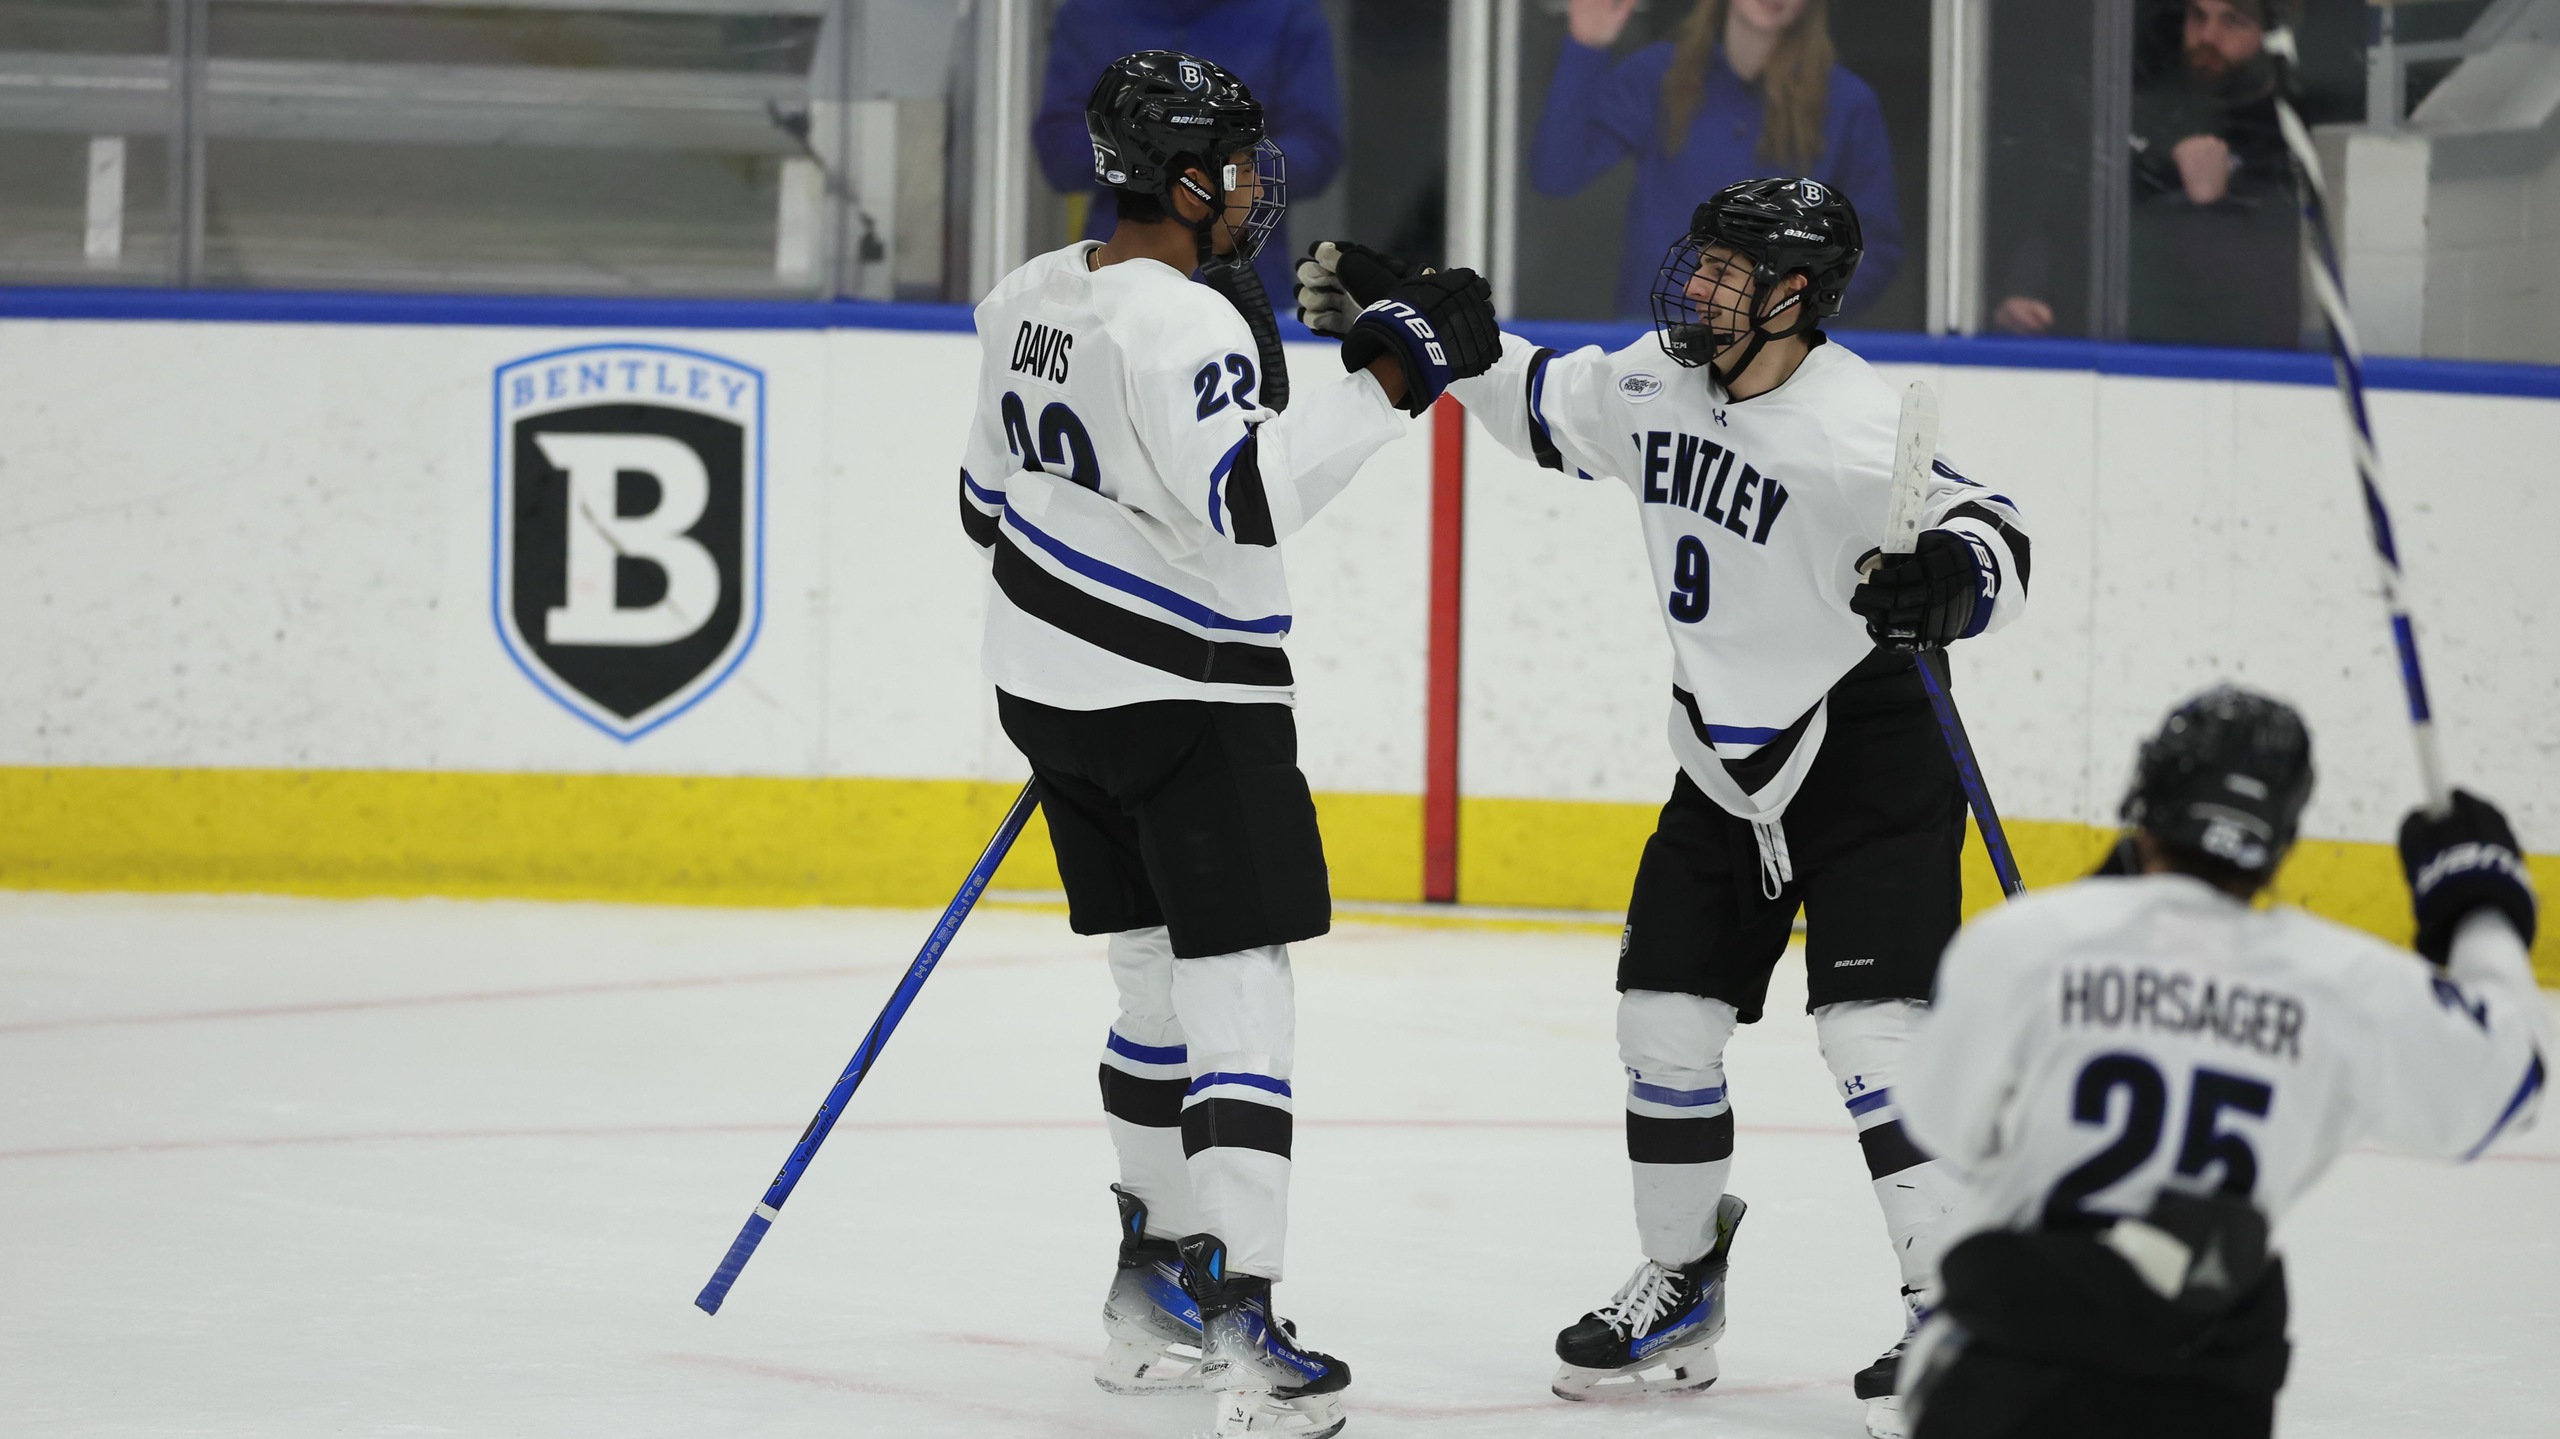 Two Goals by Davis and Hasley’s Shutout Help Give Bentley 4-0 Win Over Mercyhurst